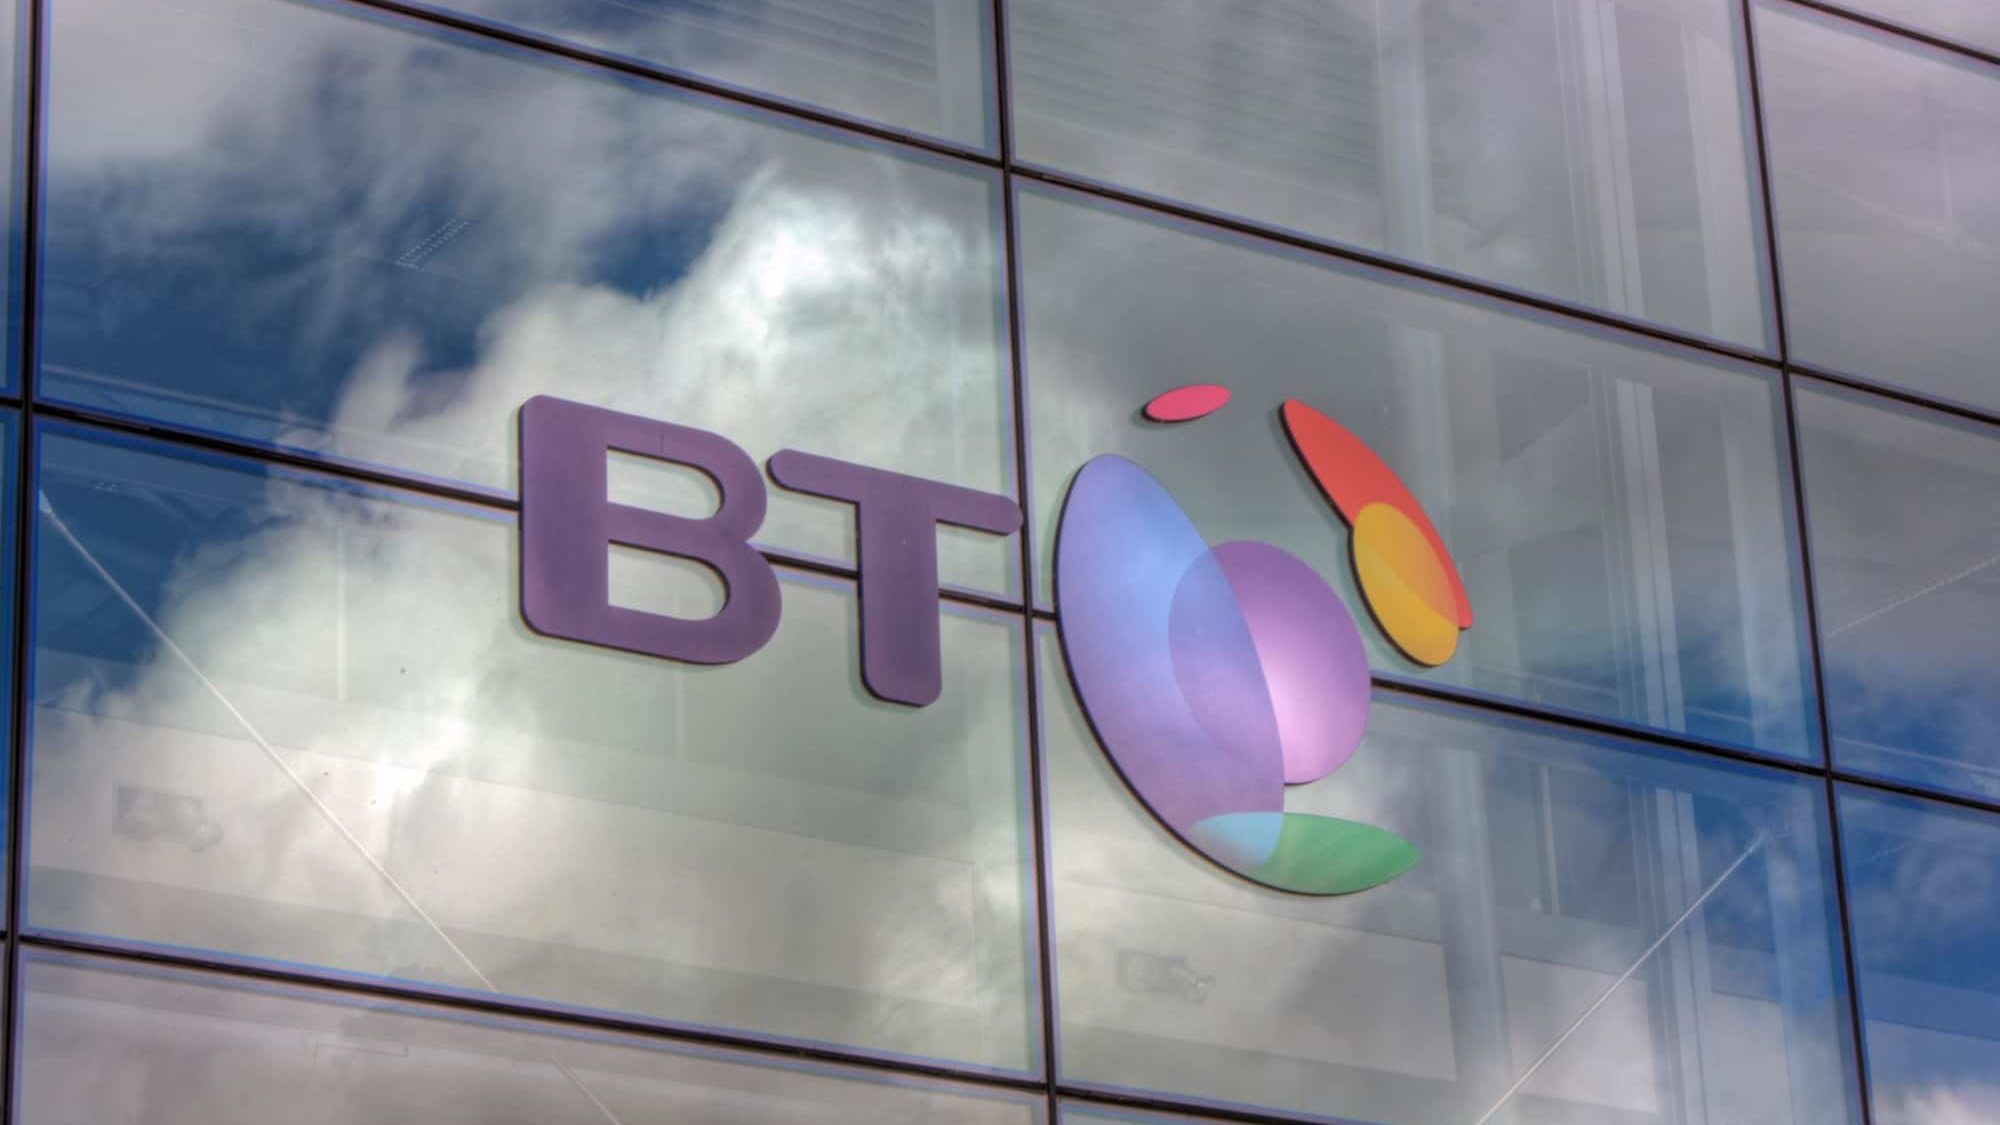 BT welcomes CMA’s approval of EE acquisition